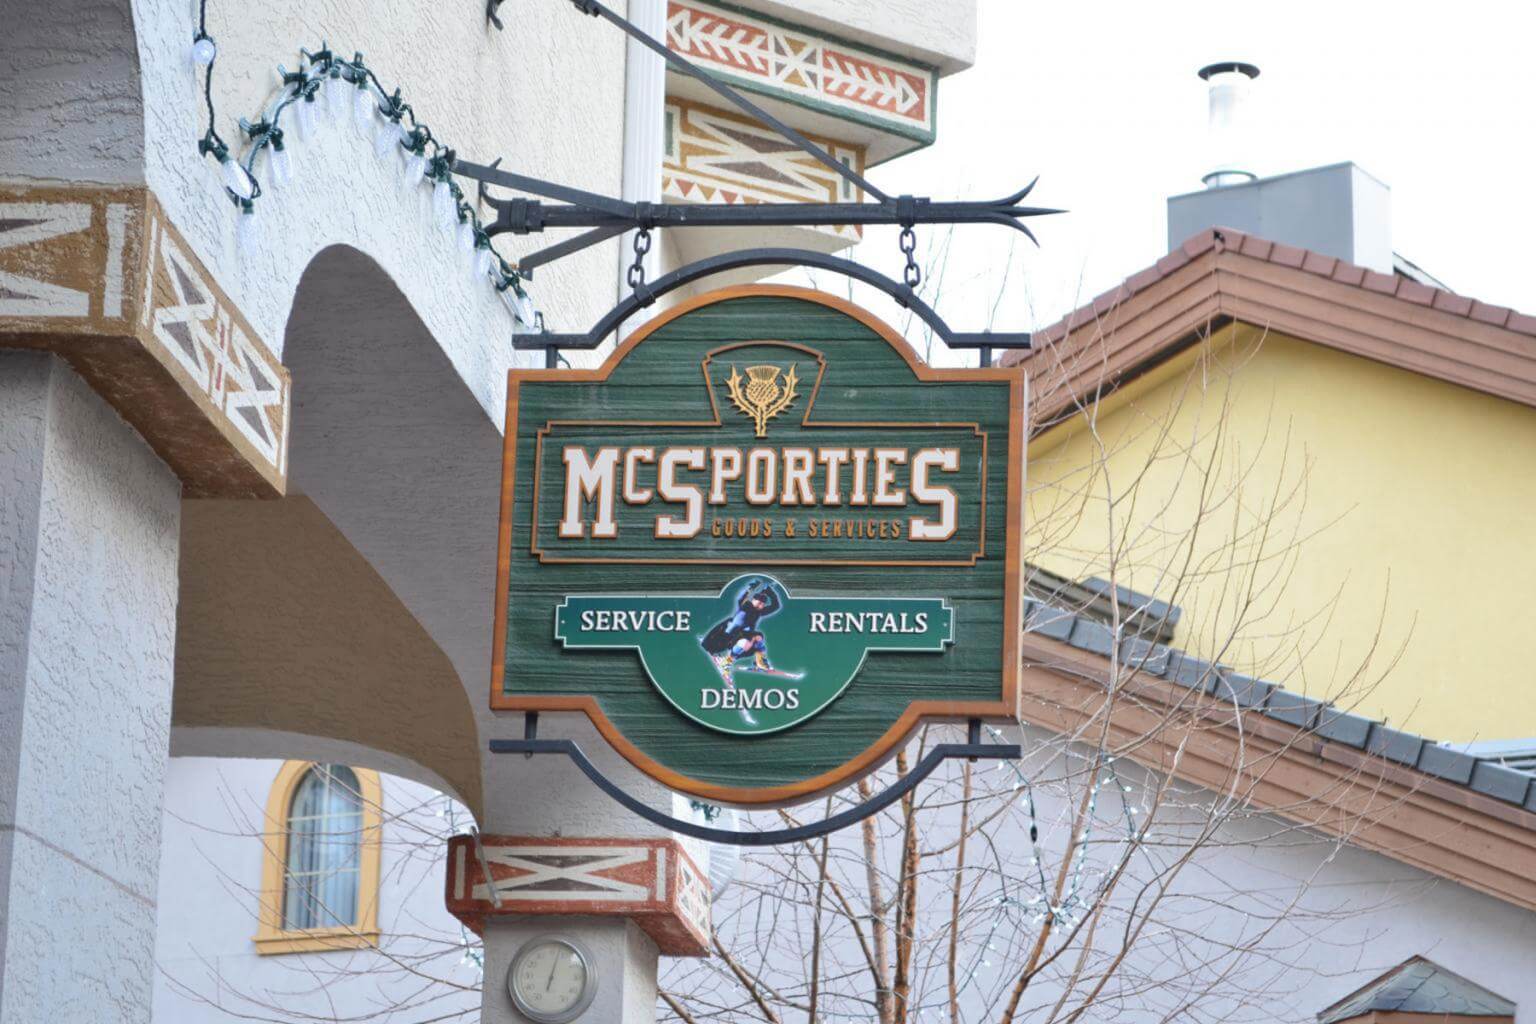 McSporties Logo outside of the shop